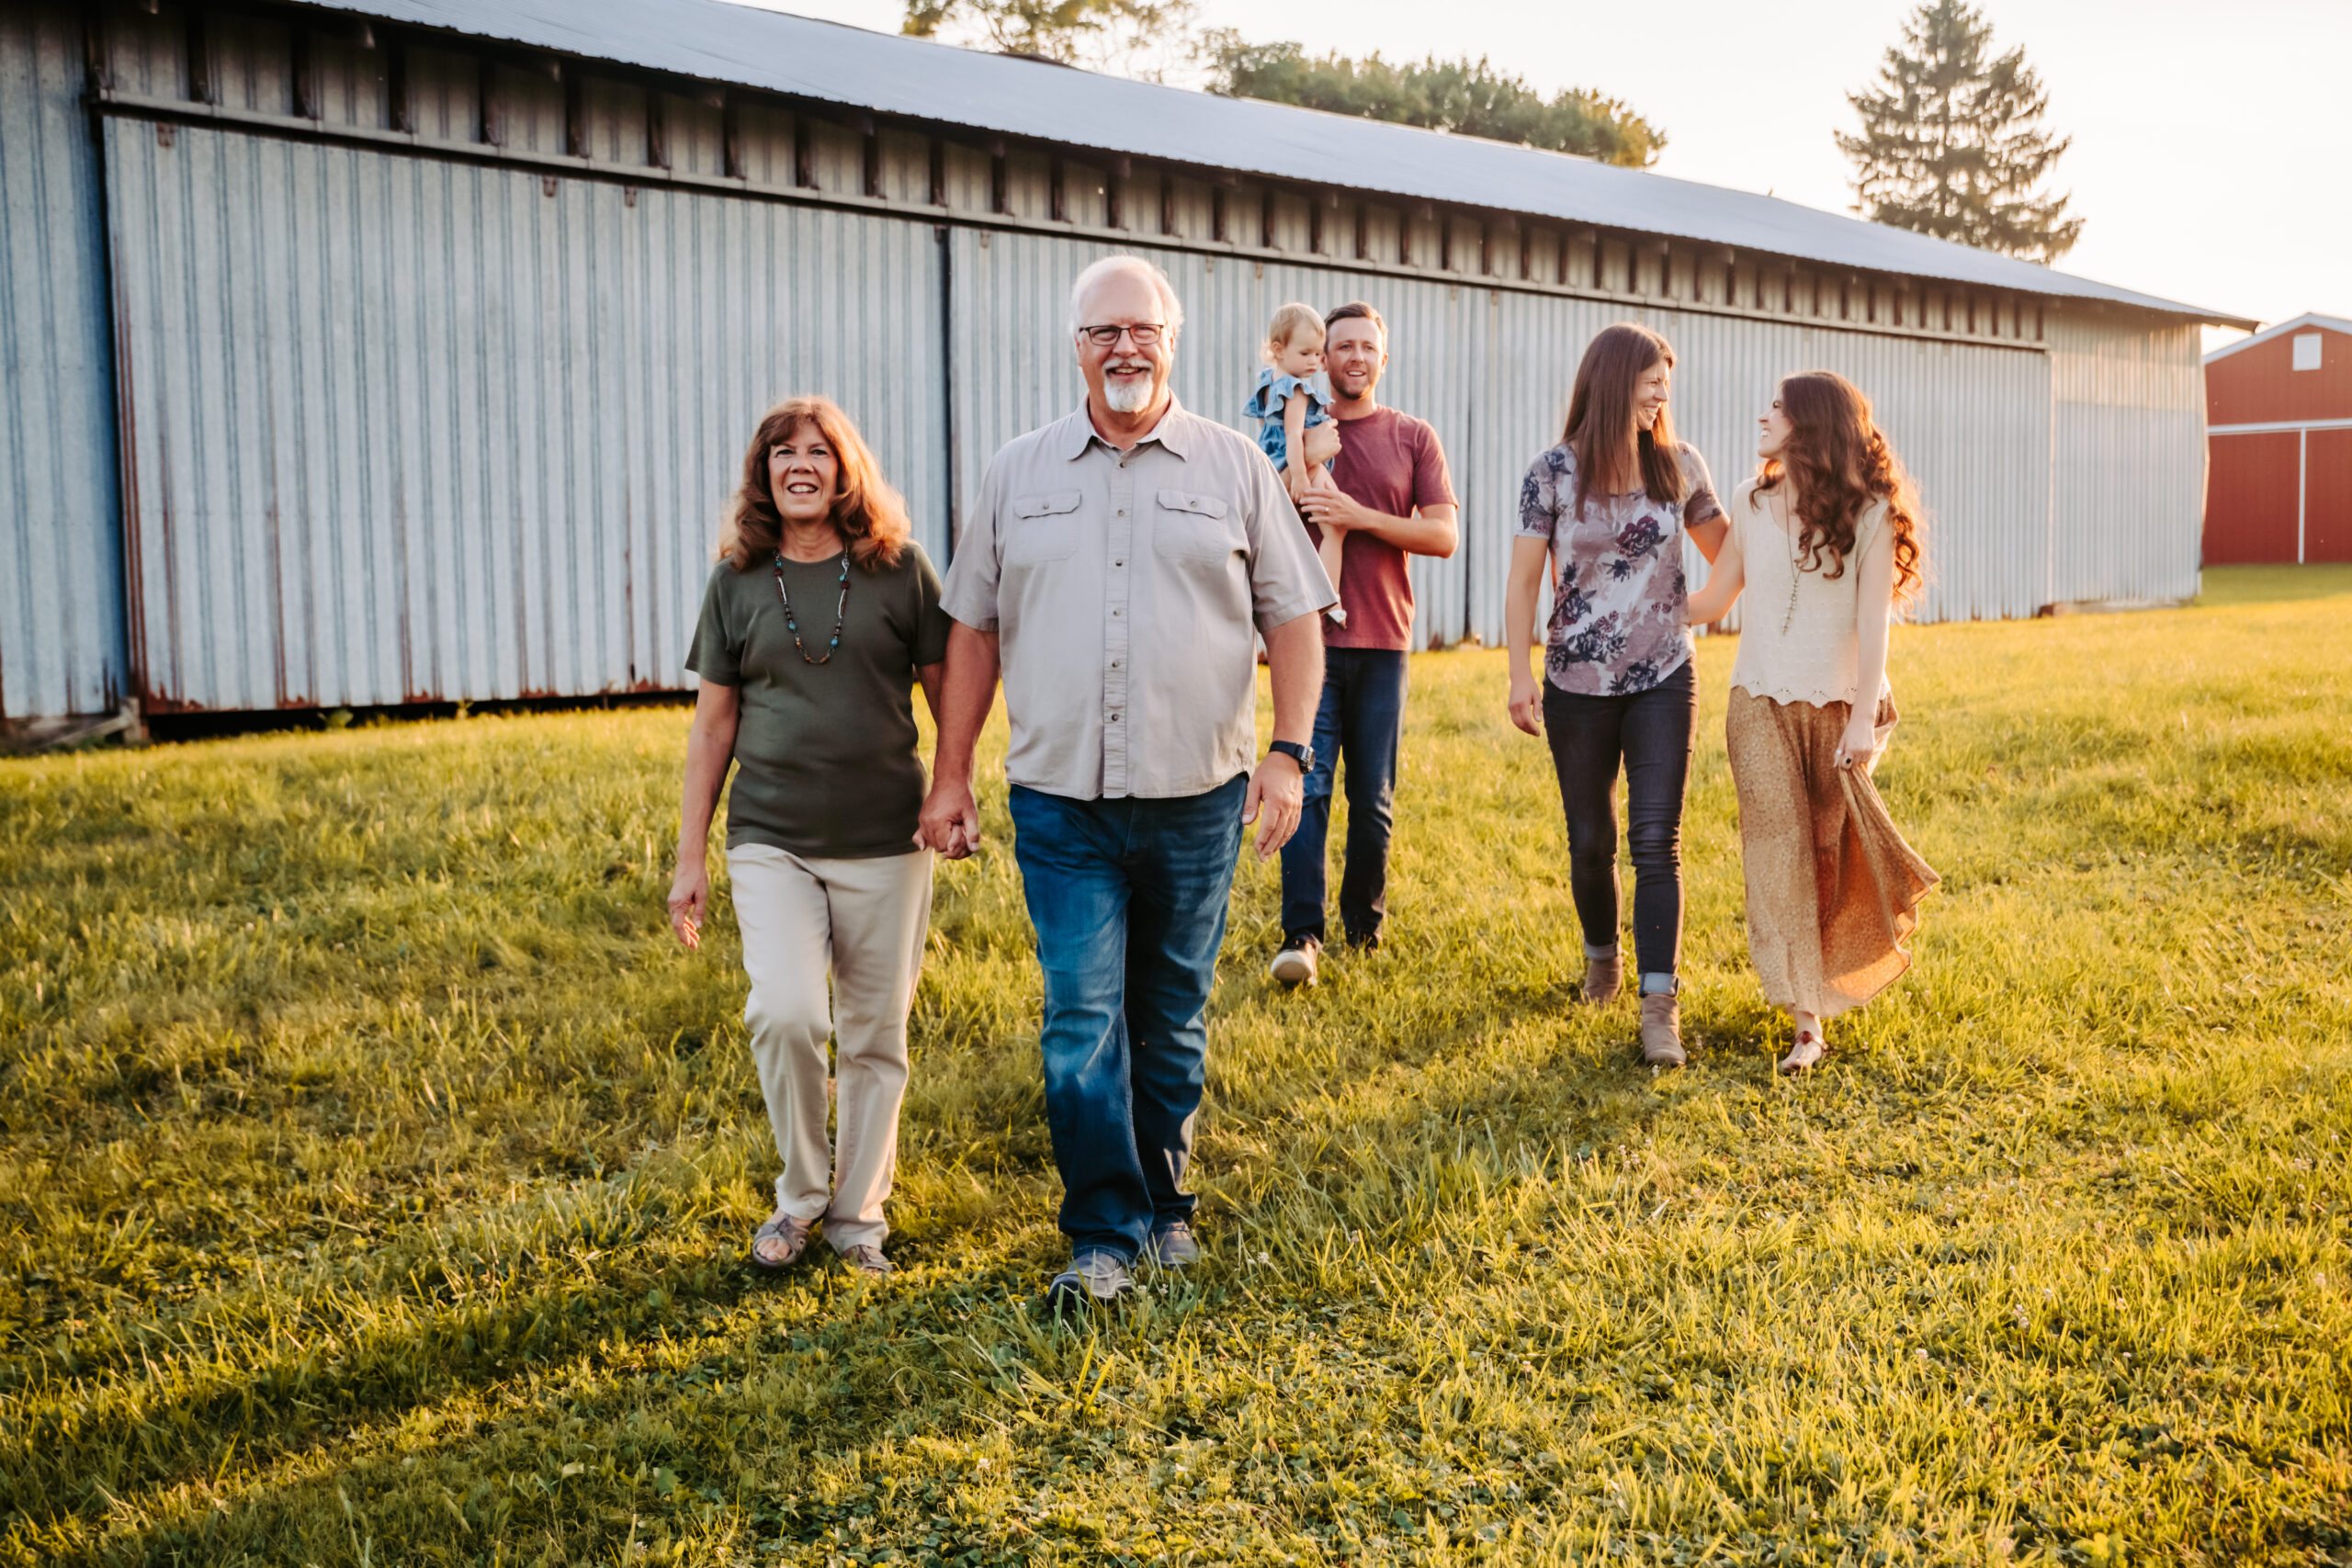 family walking across field in front of barn laughing together